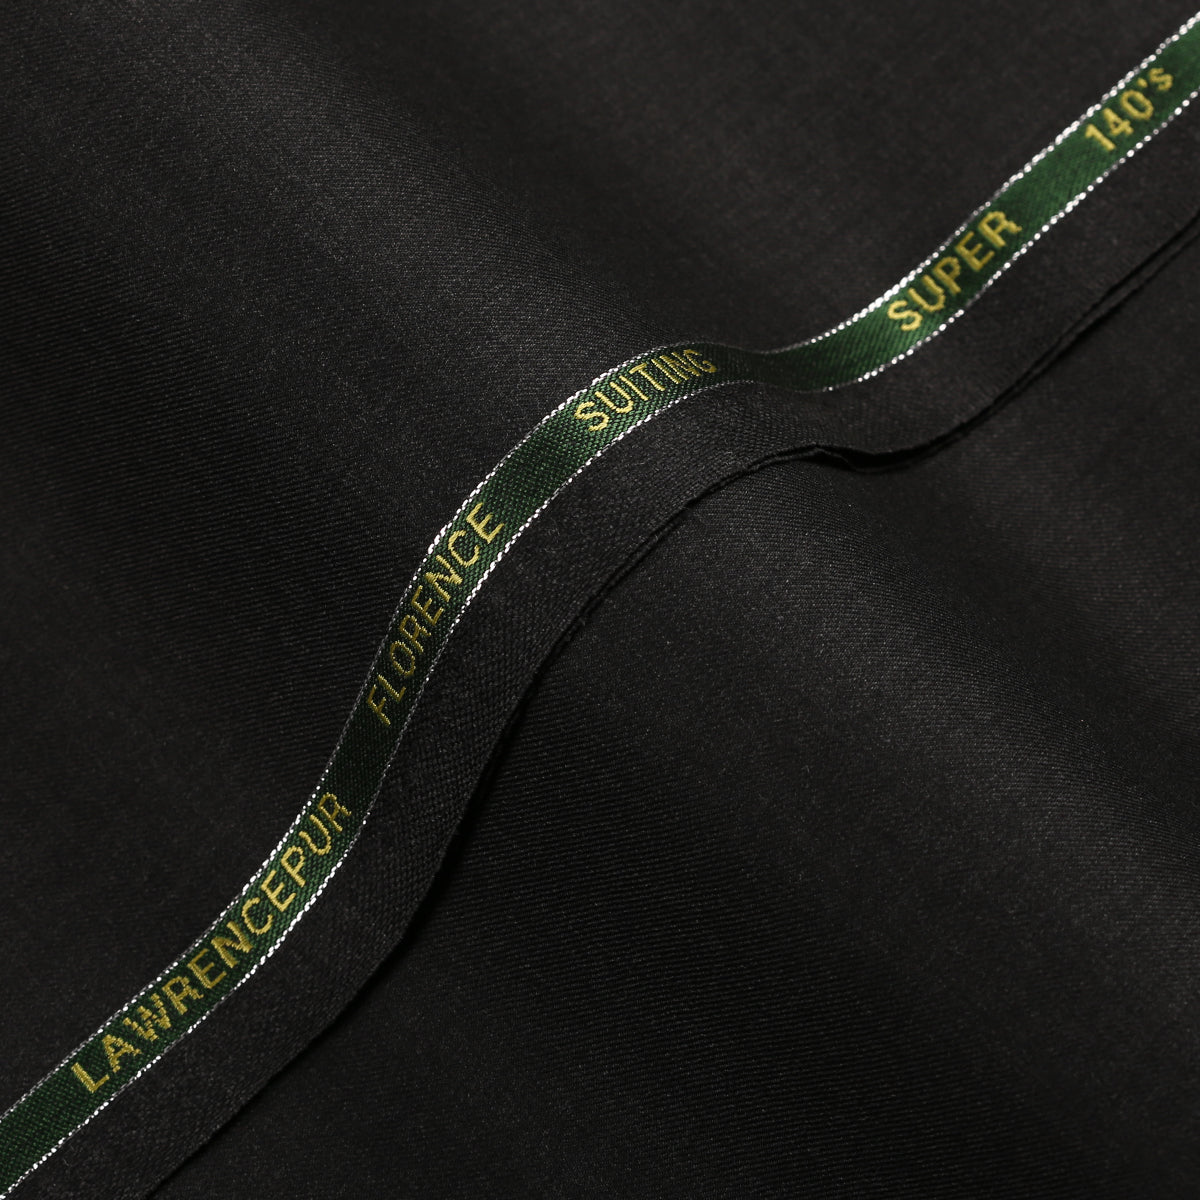 Plain-Charcoal Grey, S 140s Pure Wool, Florence Suiting Fabric